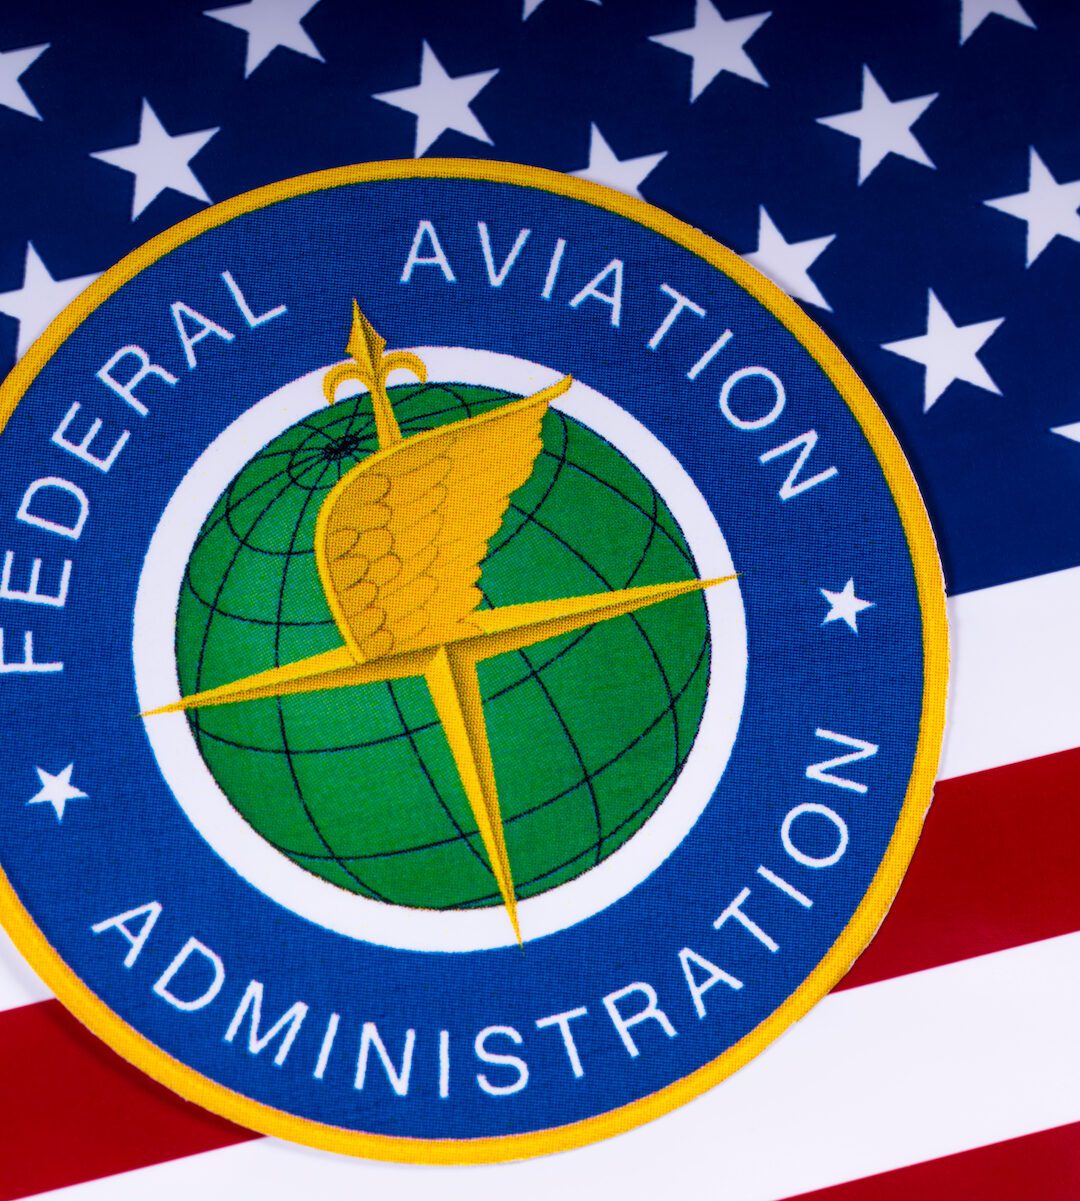 Bids on $2.4-Billion IDIQ for Federal Aviation Administration Due Next Month